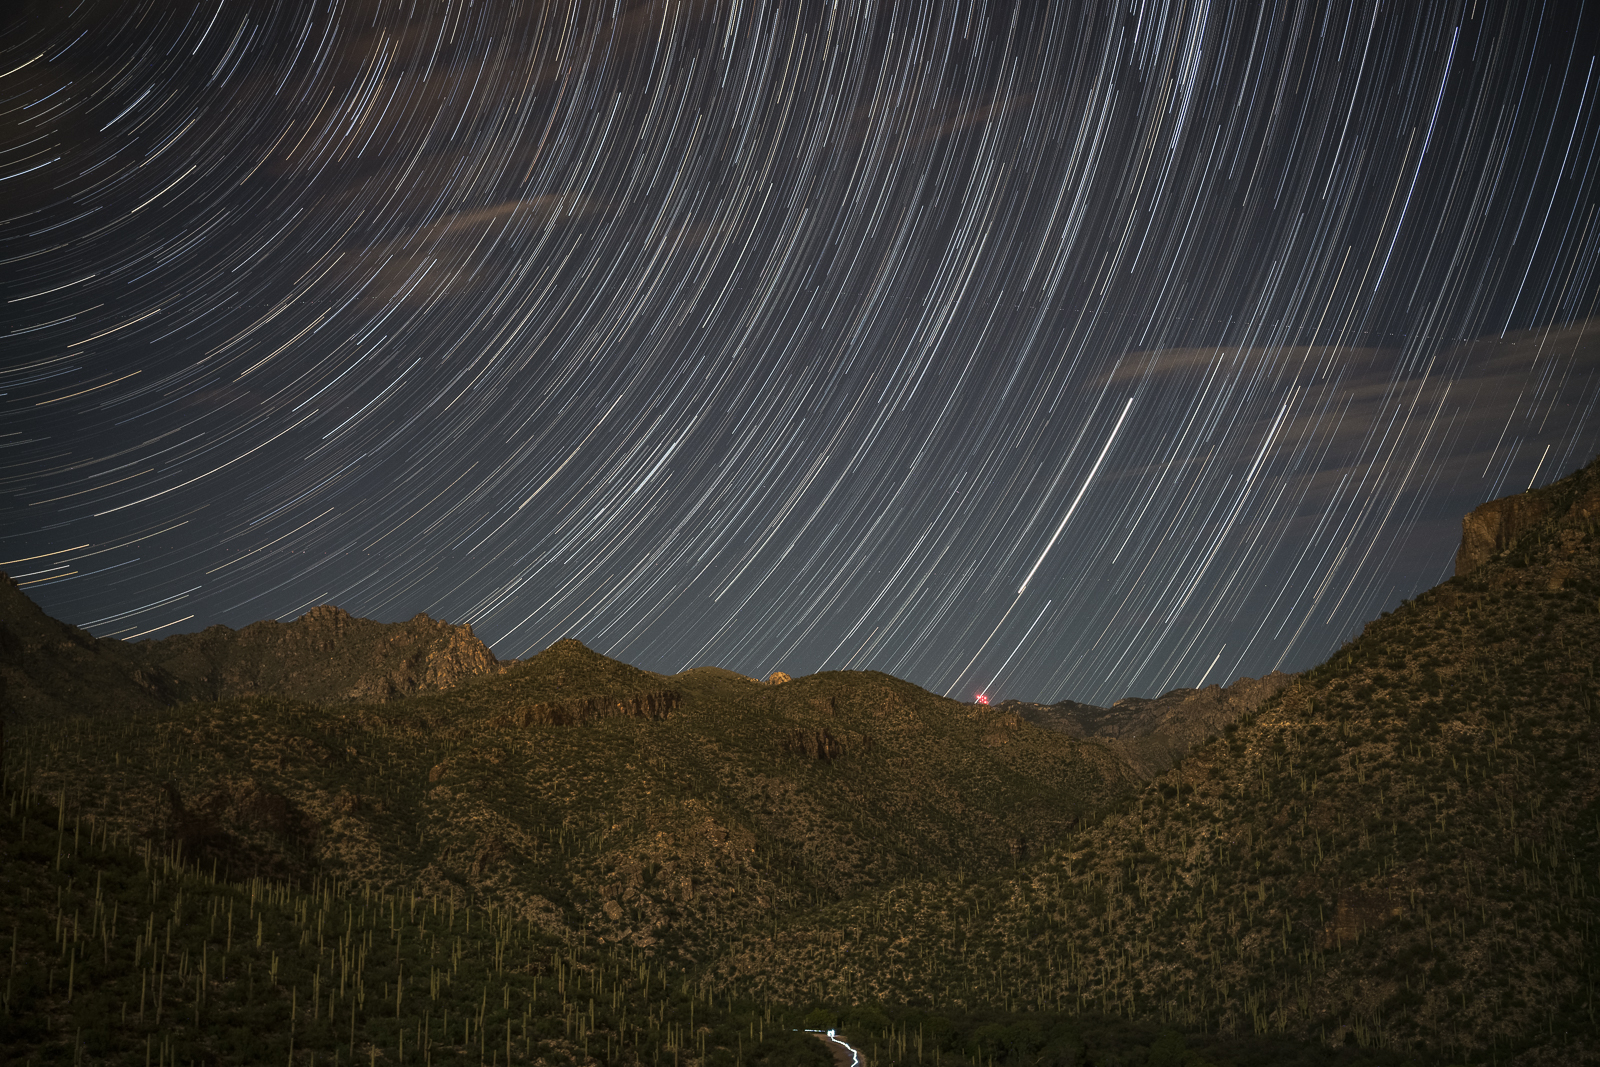 Star trails and the lights from Mount Bigelow - looking up Sabino Canyon from the Stone Water Tank. September 2016.